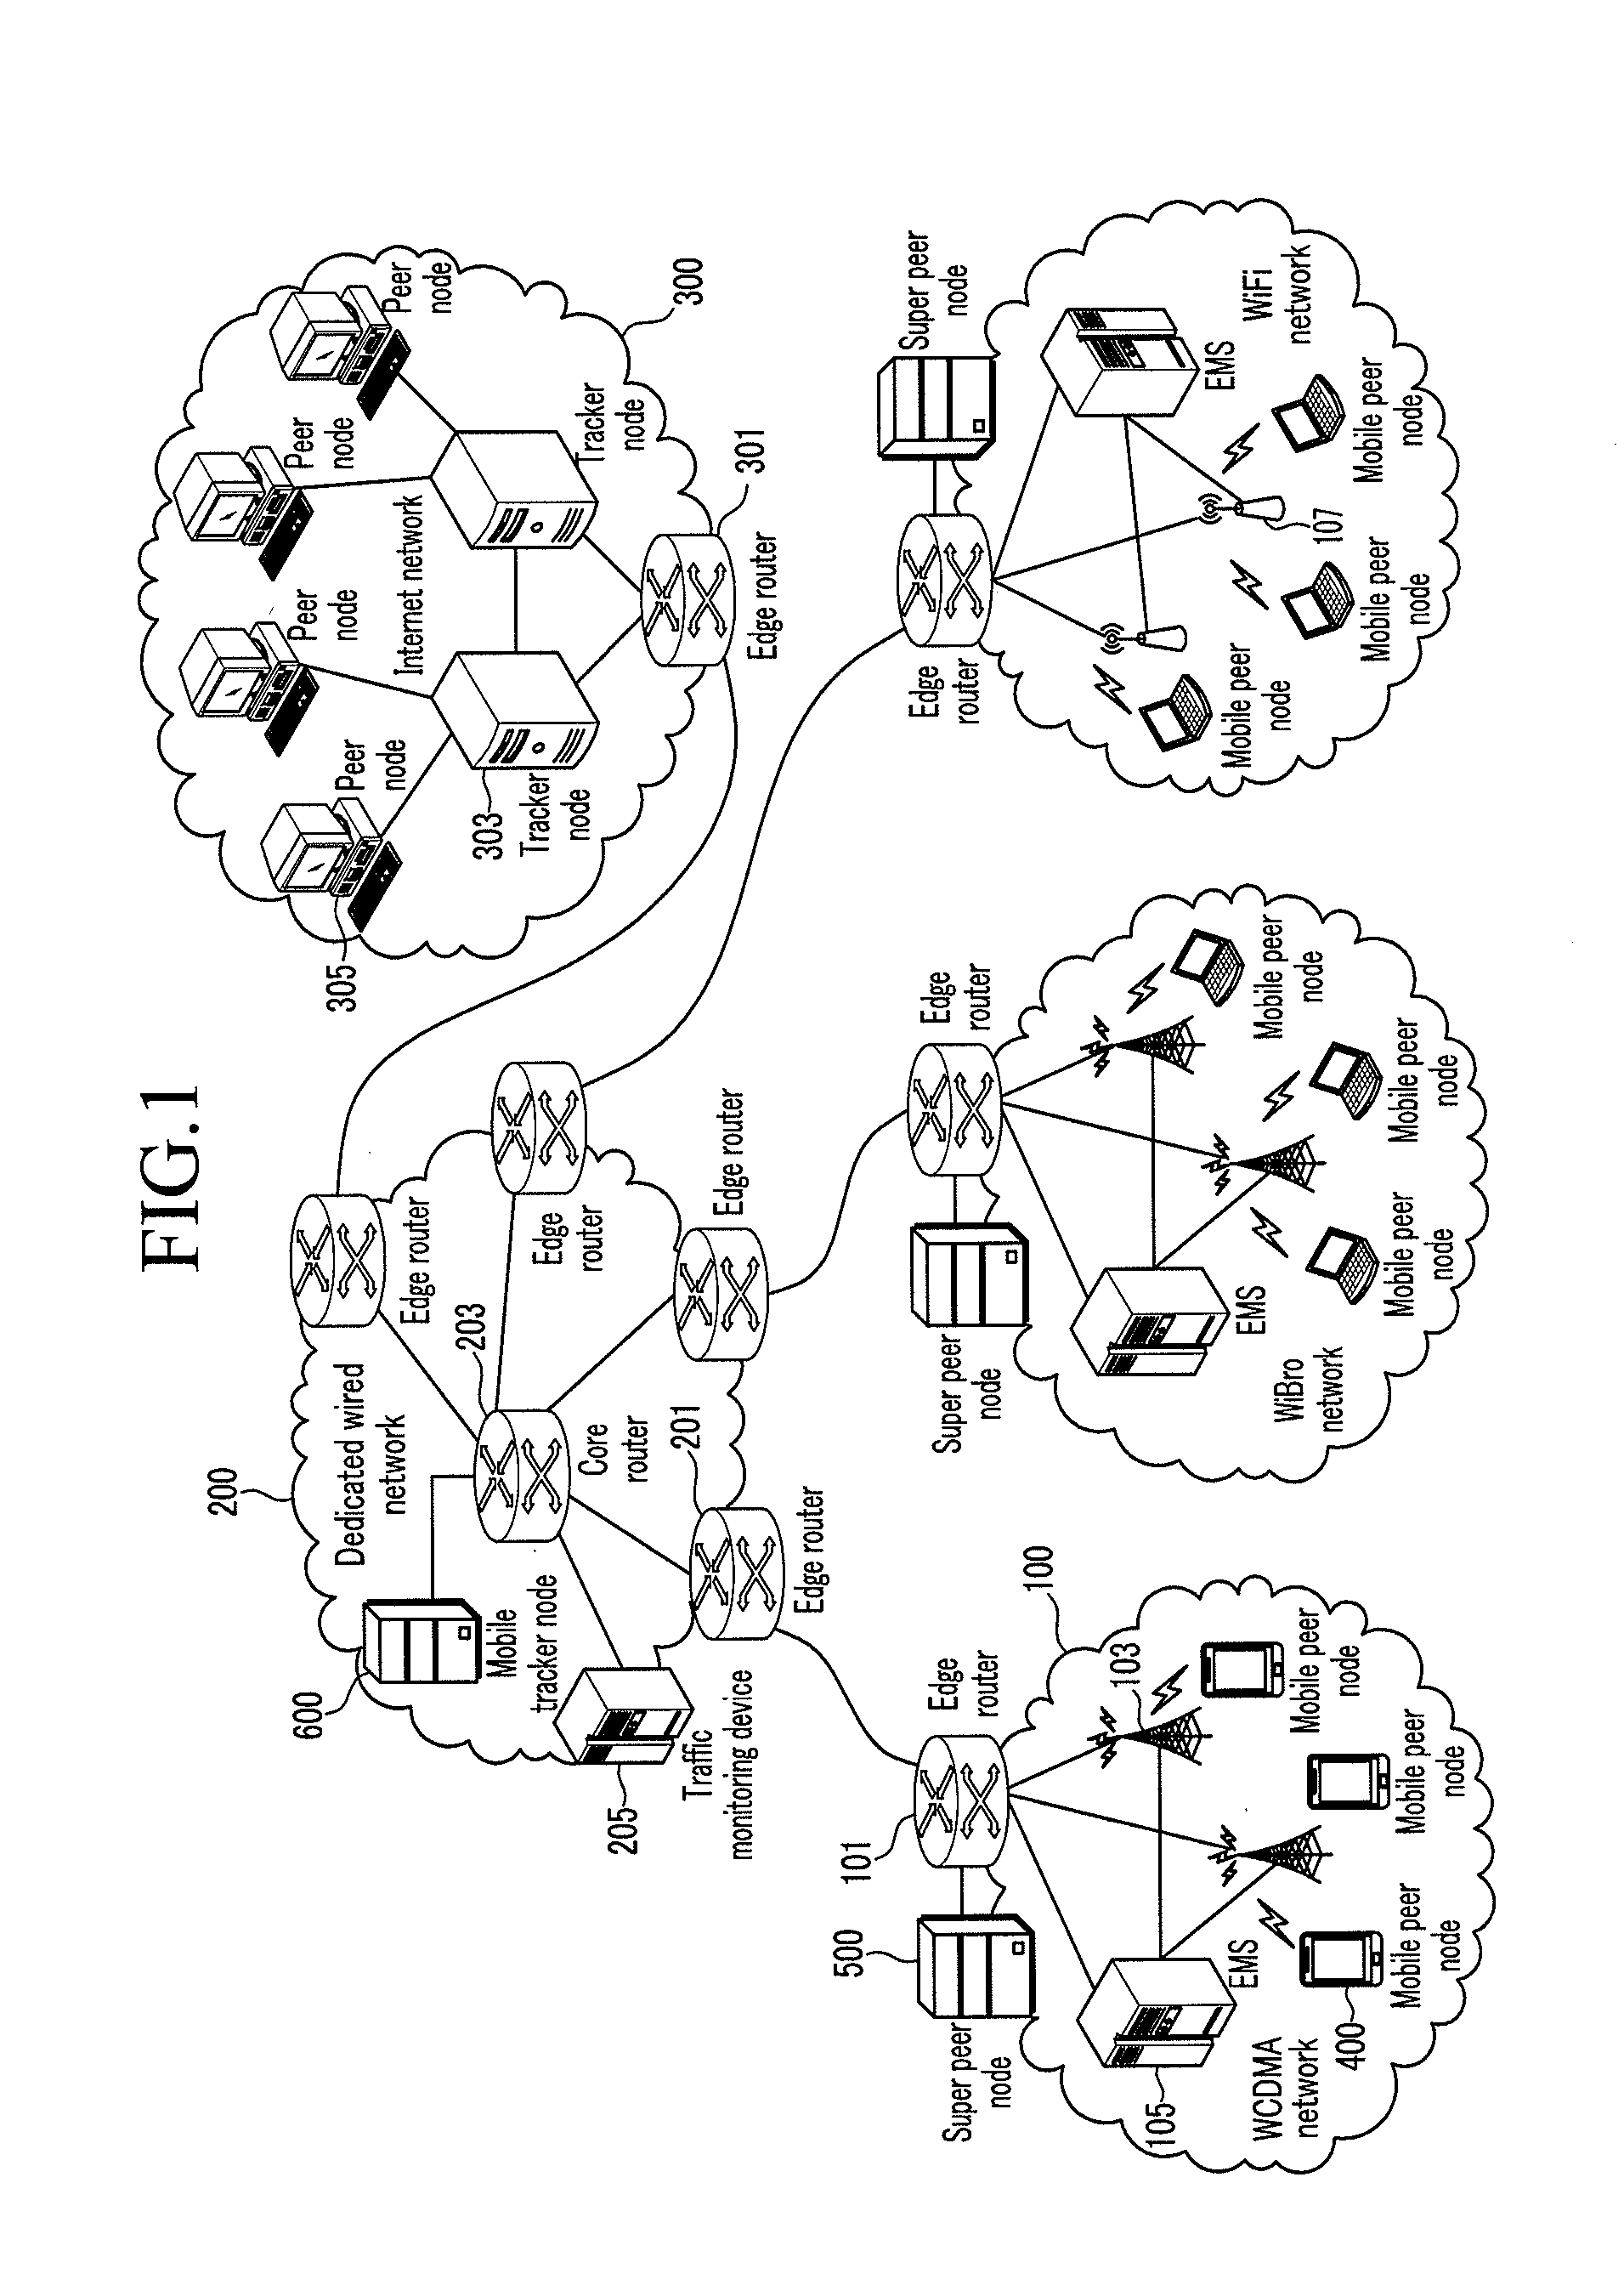 System and method for providing mobile p2p service